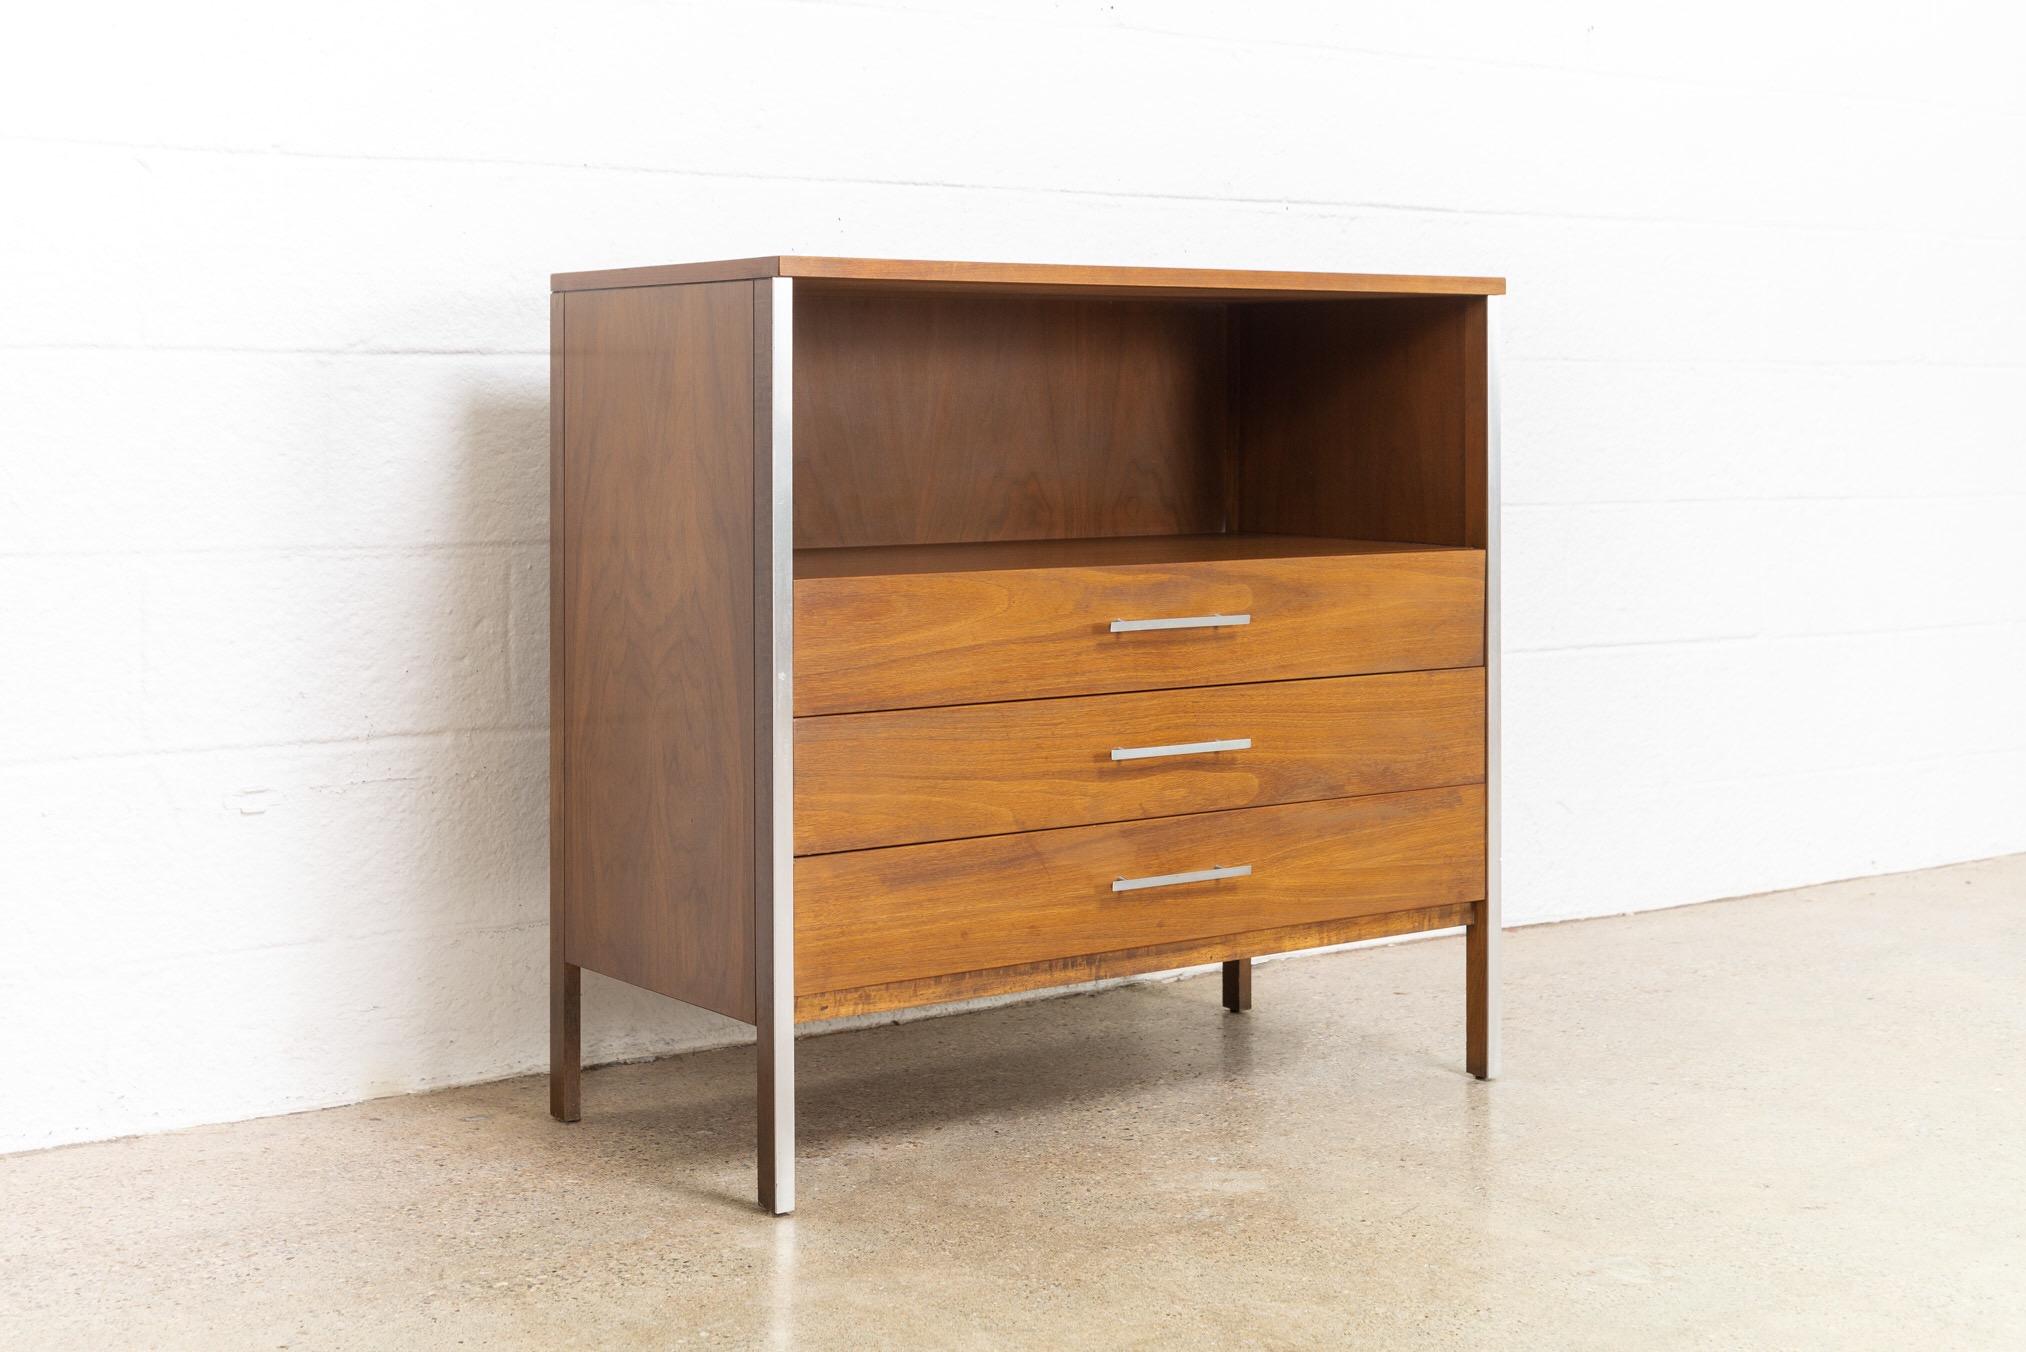 American Midcentury Paul McCobb Linear Group for Calvin Chest of Drawers, 1950s For Sale